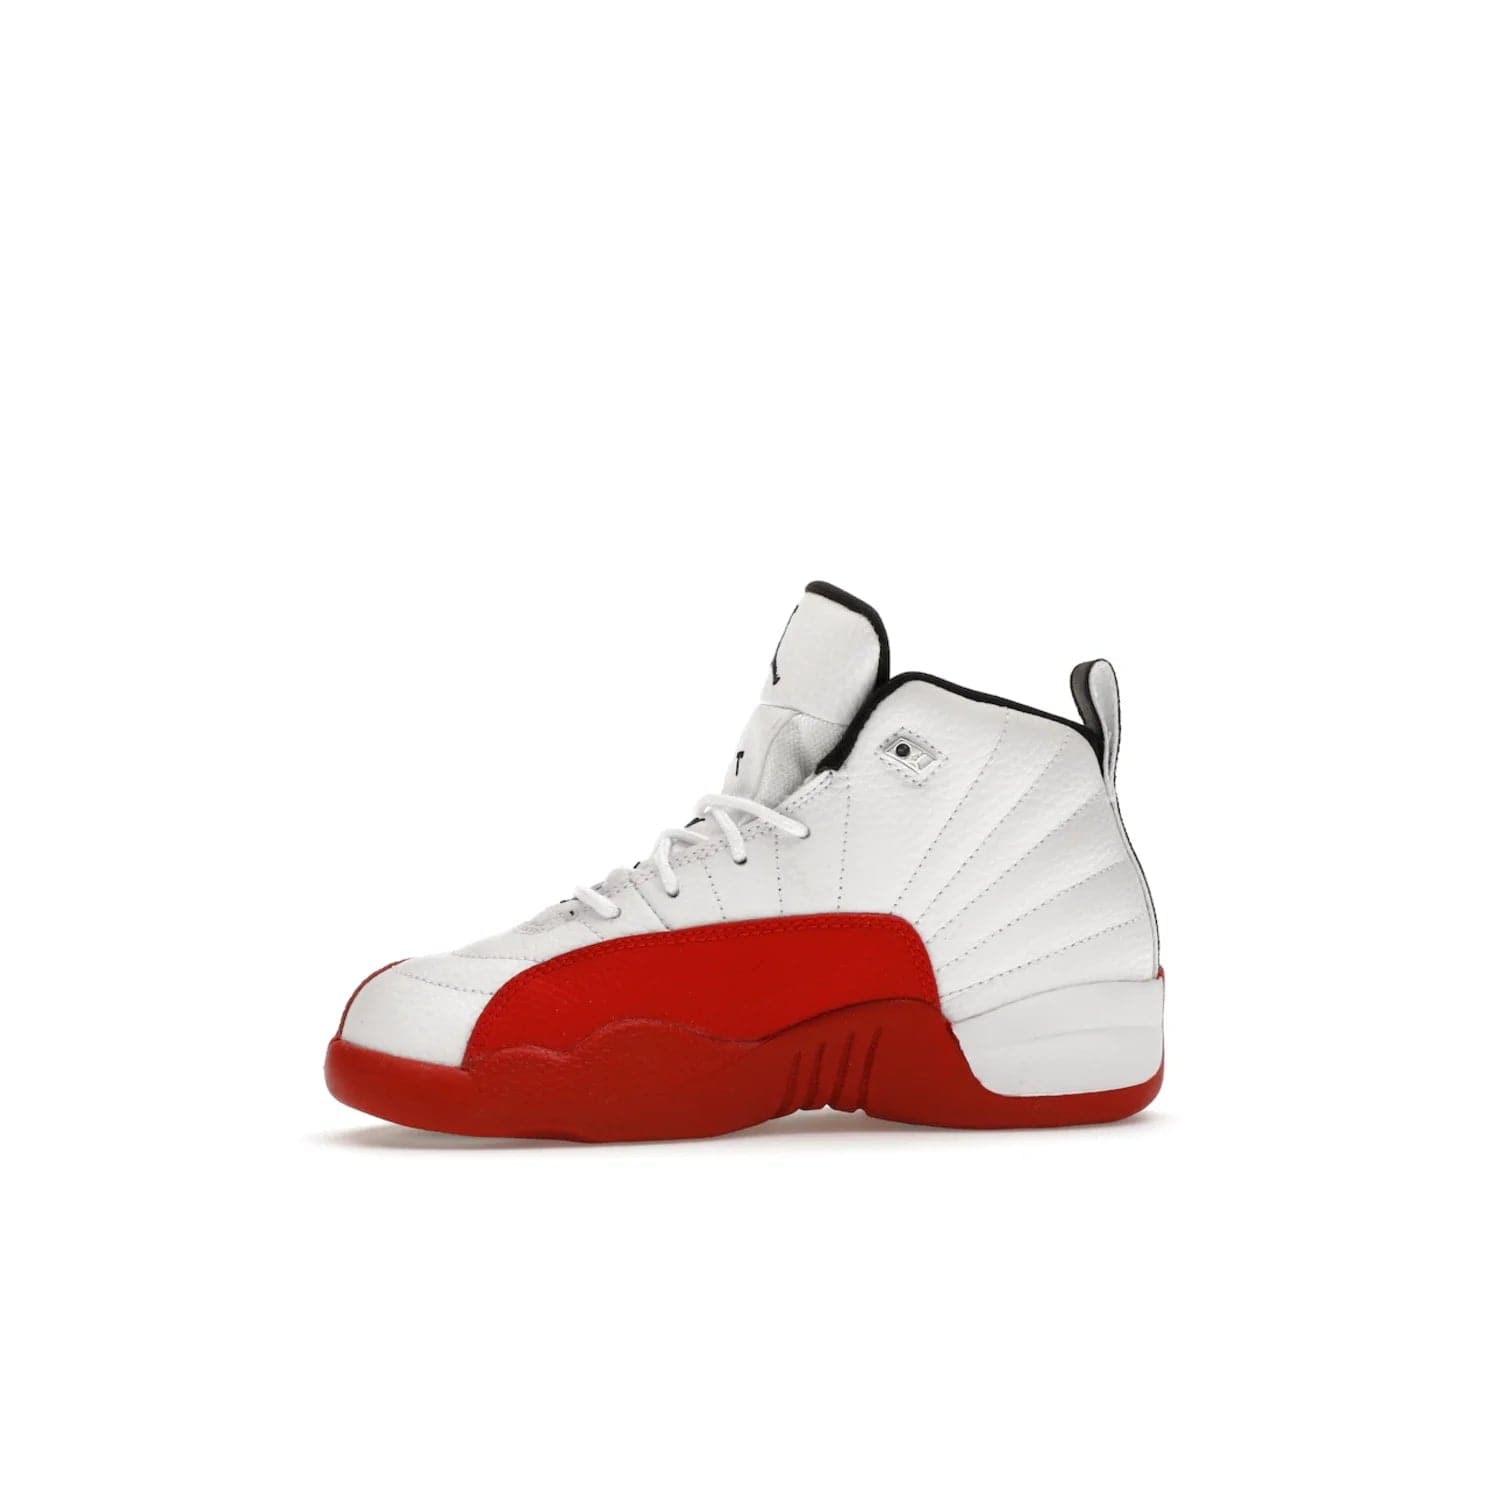 Jordan 12 Retro Cherry (2023) (PS) - Image 18 - Only at www.BallersClubKickz.com - Jordan 12 Retro Cherry dropping for toddlers in 2023! White leather upper with black overlays and red branding. Classic court style for your little one.